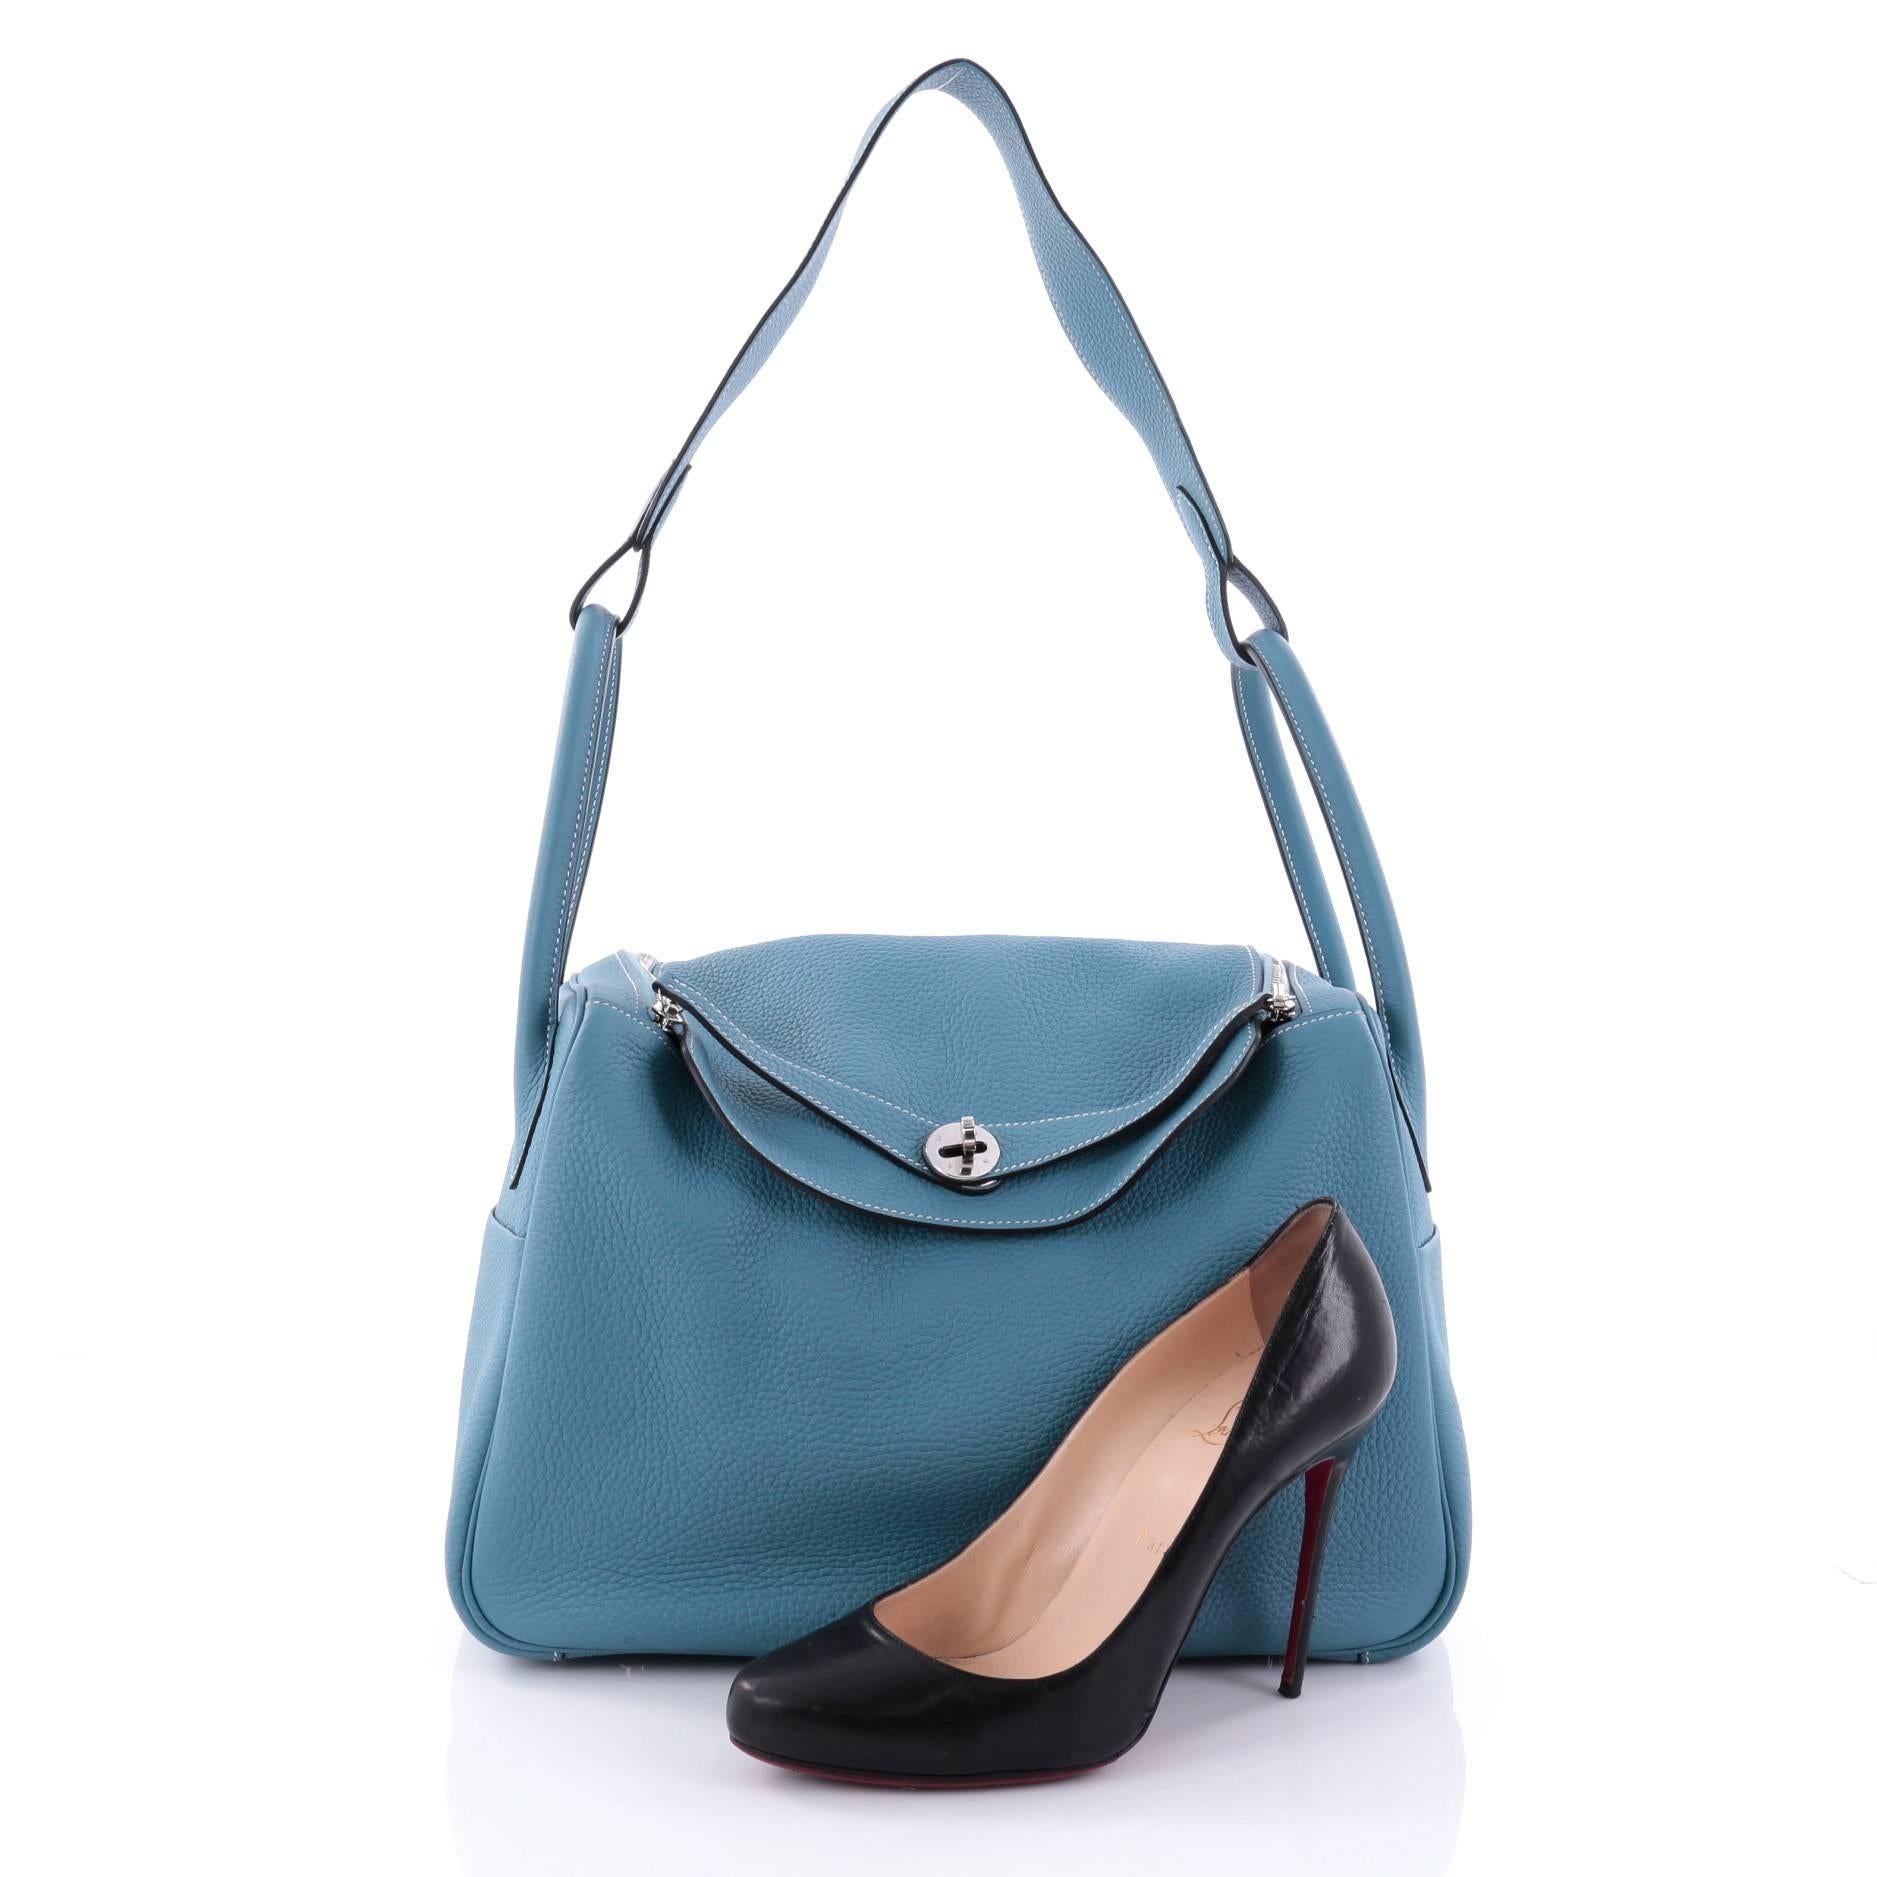 This authentic Hermes Lindy Handbag Clemence 34 is a hard-to-find bag made for Hermes lovers. Crafted from blue jean clemence leather, this chic shoulder bag features dual-rolled handles with a connecting long strap, two side slip pockets,